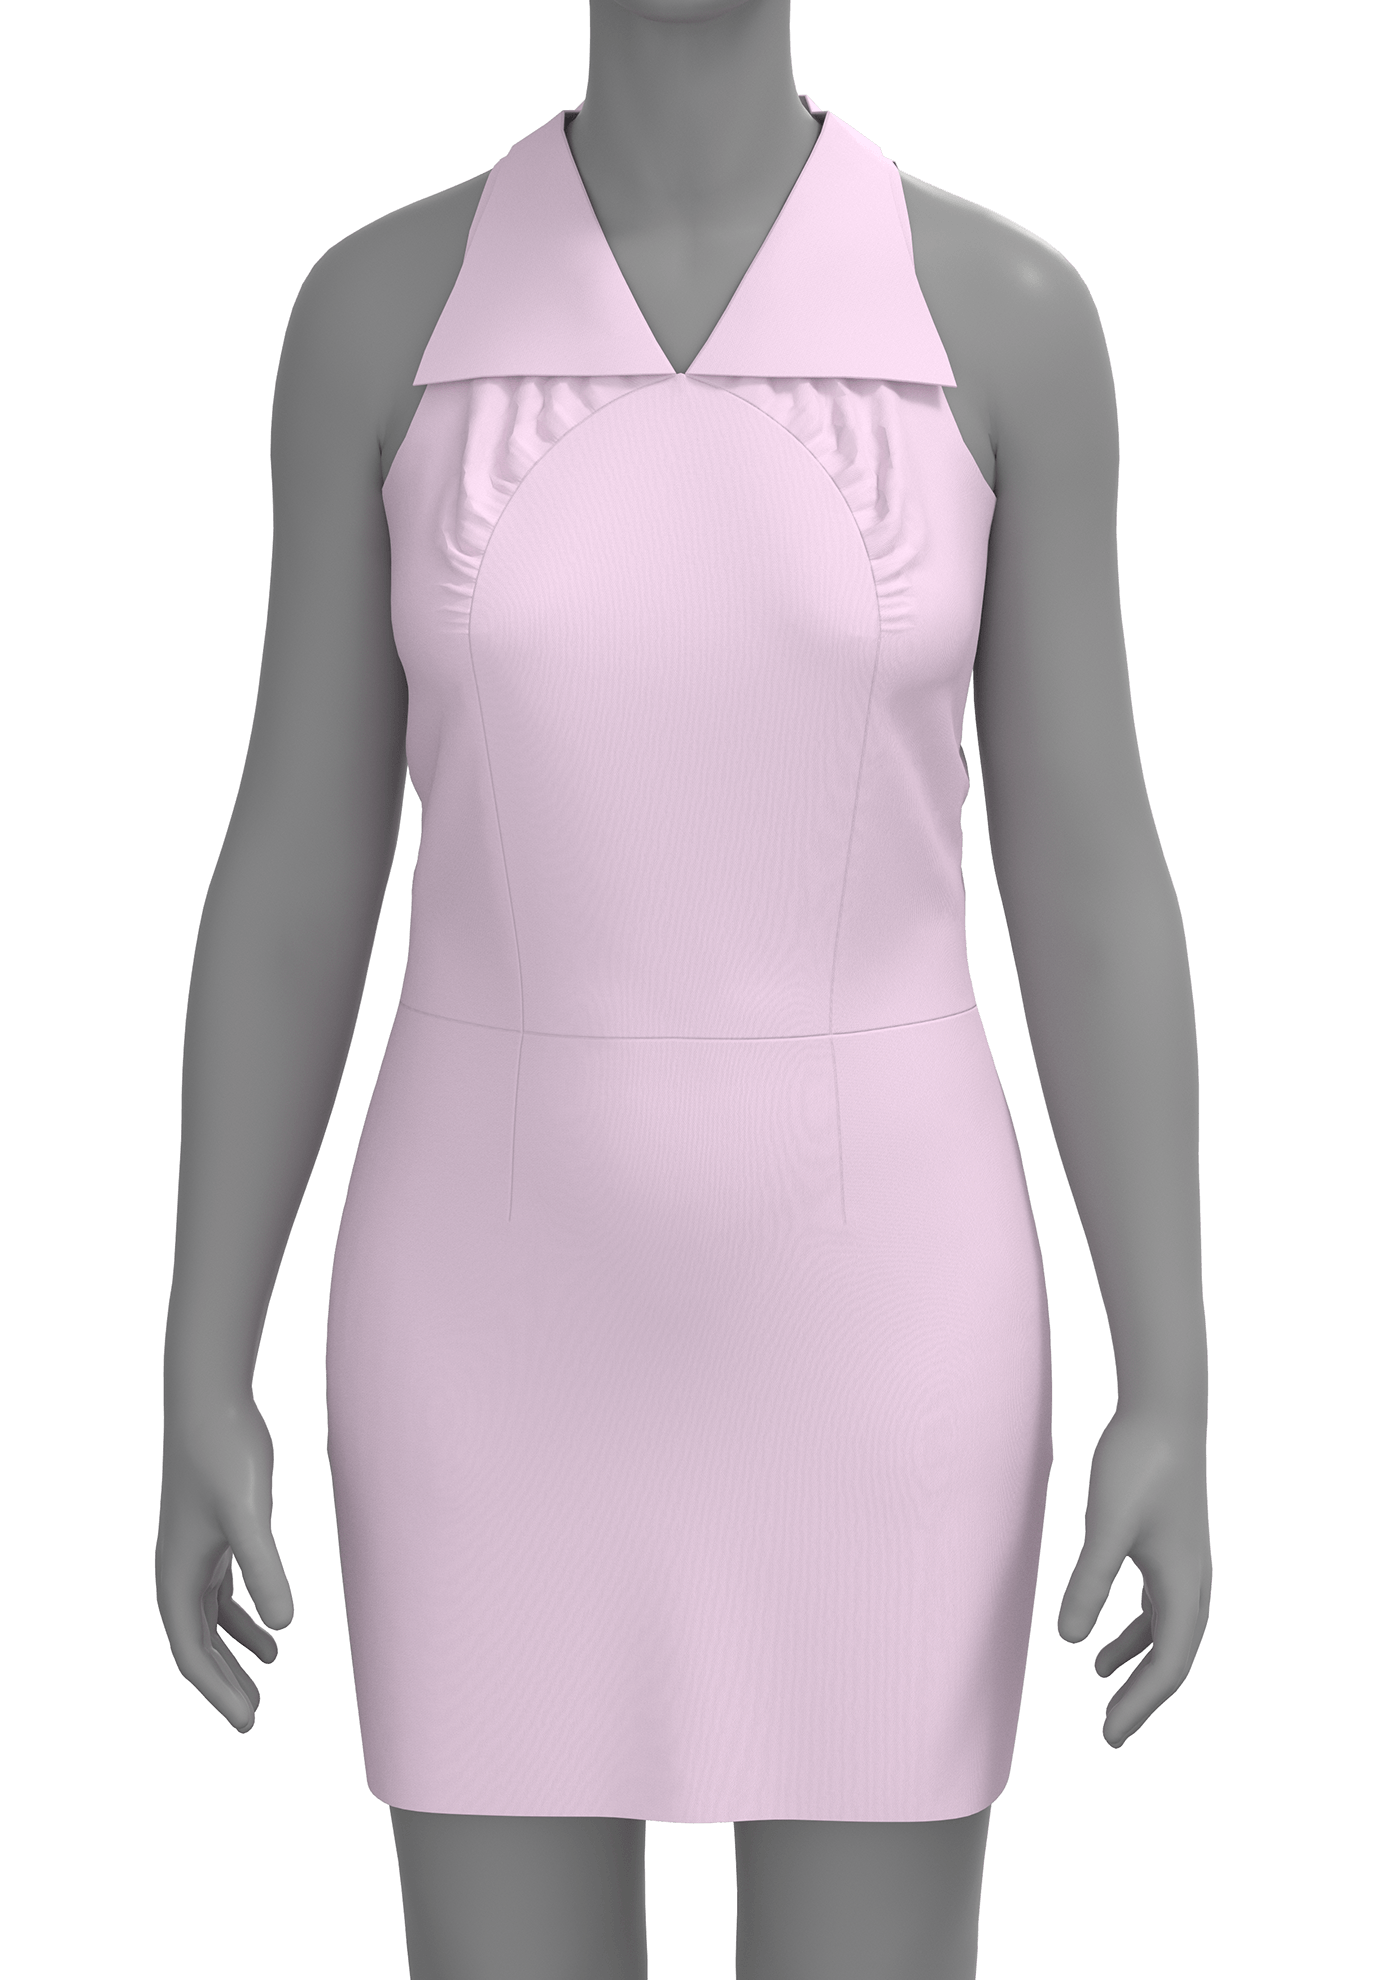 3dclothing added and fullness draping technique patternmaking